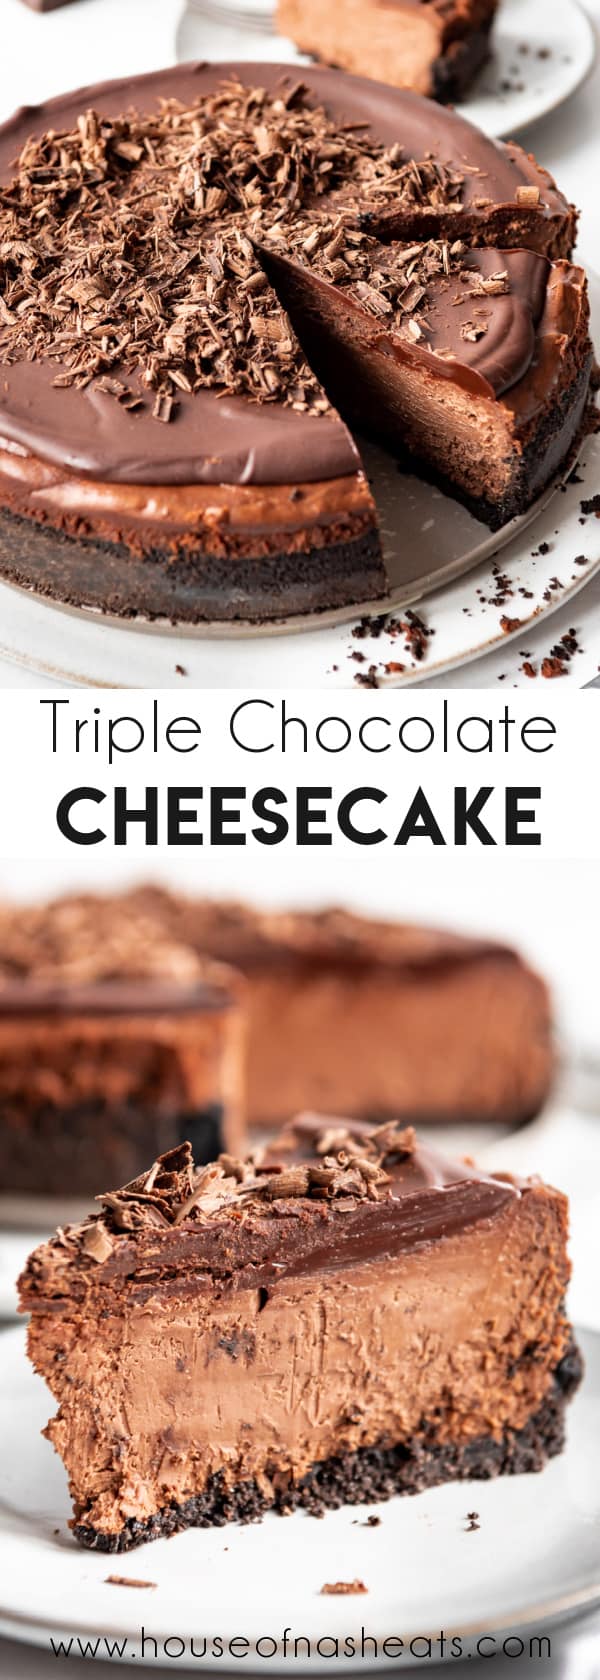 A collage of images of chocolate cheesecake with text overlay.